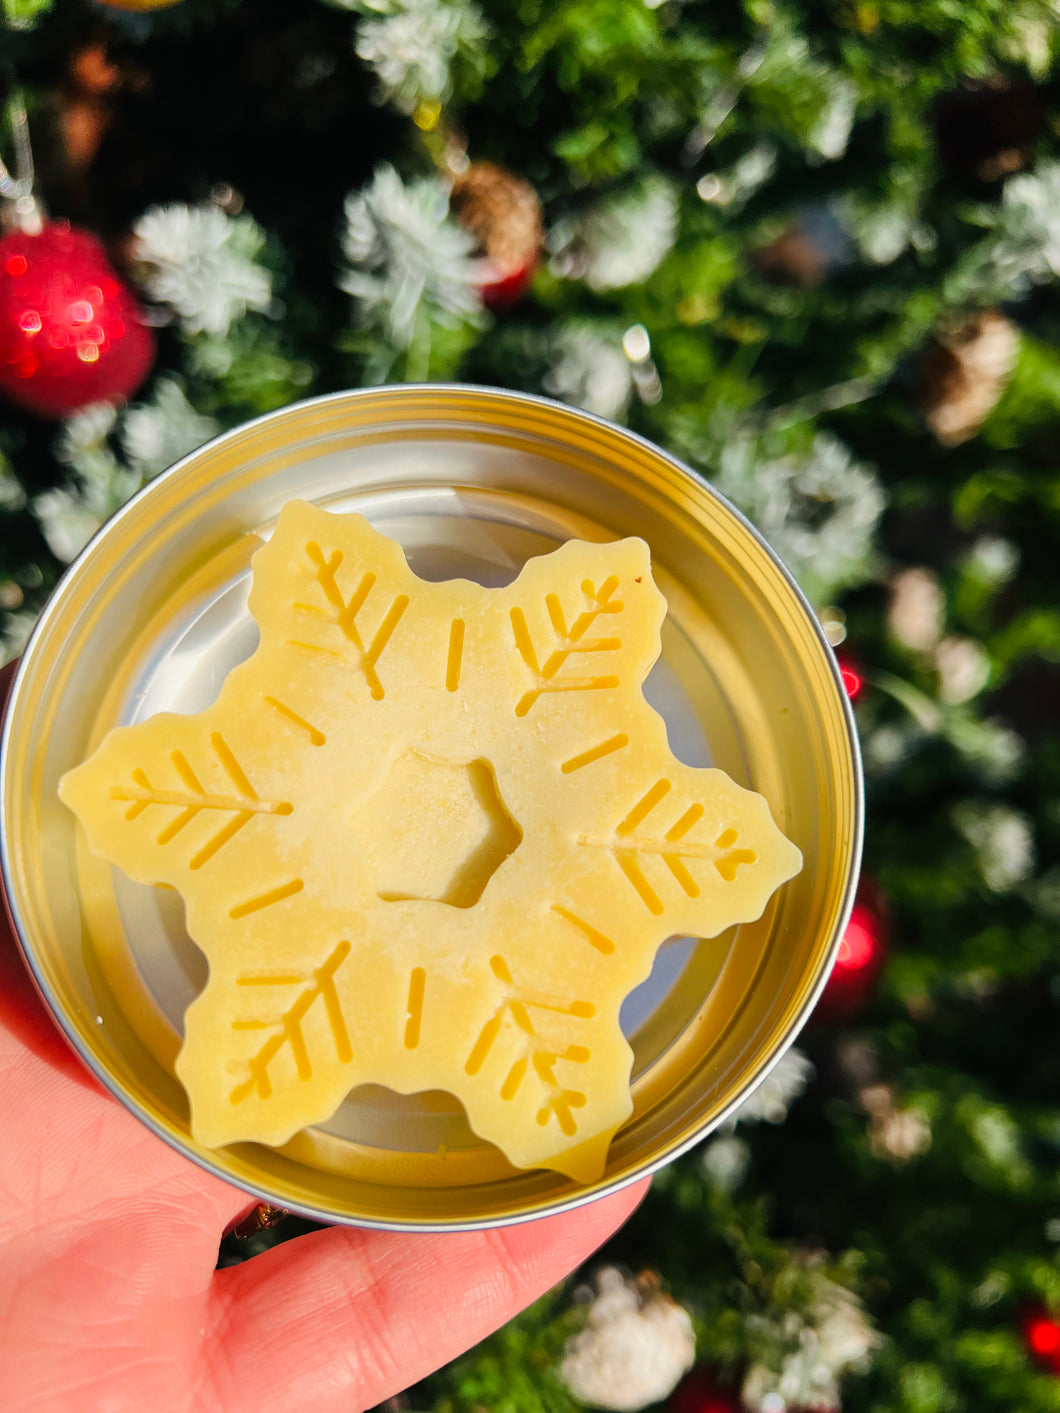 Snowflake Lavender Lotion Bar rich in organic Cocoa Butter, Shea Butter & Lavender essential oil